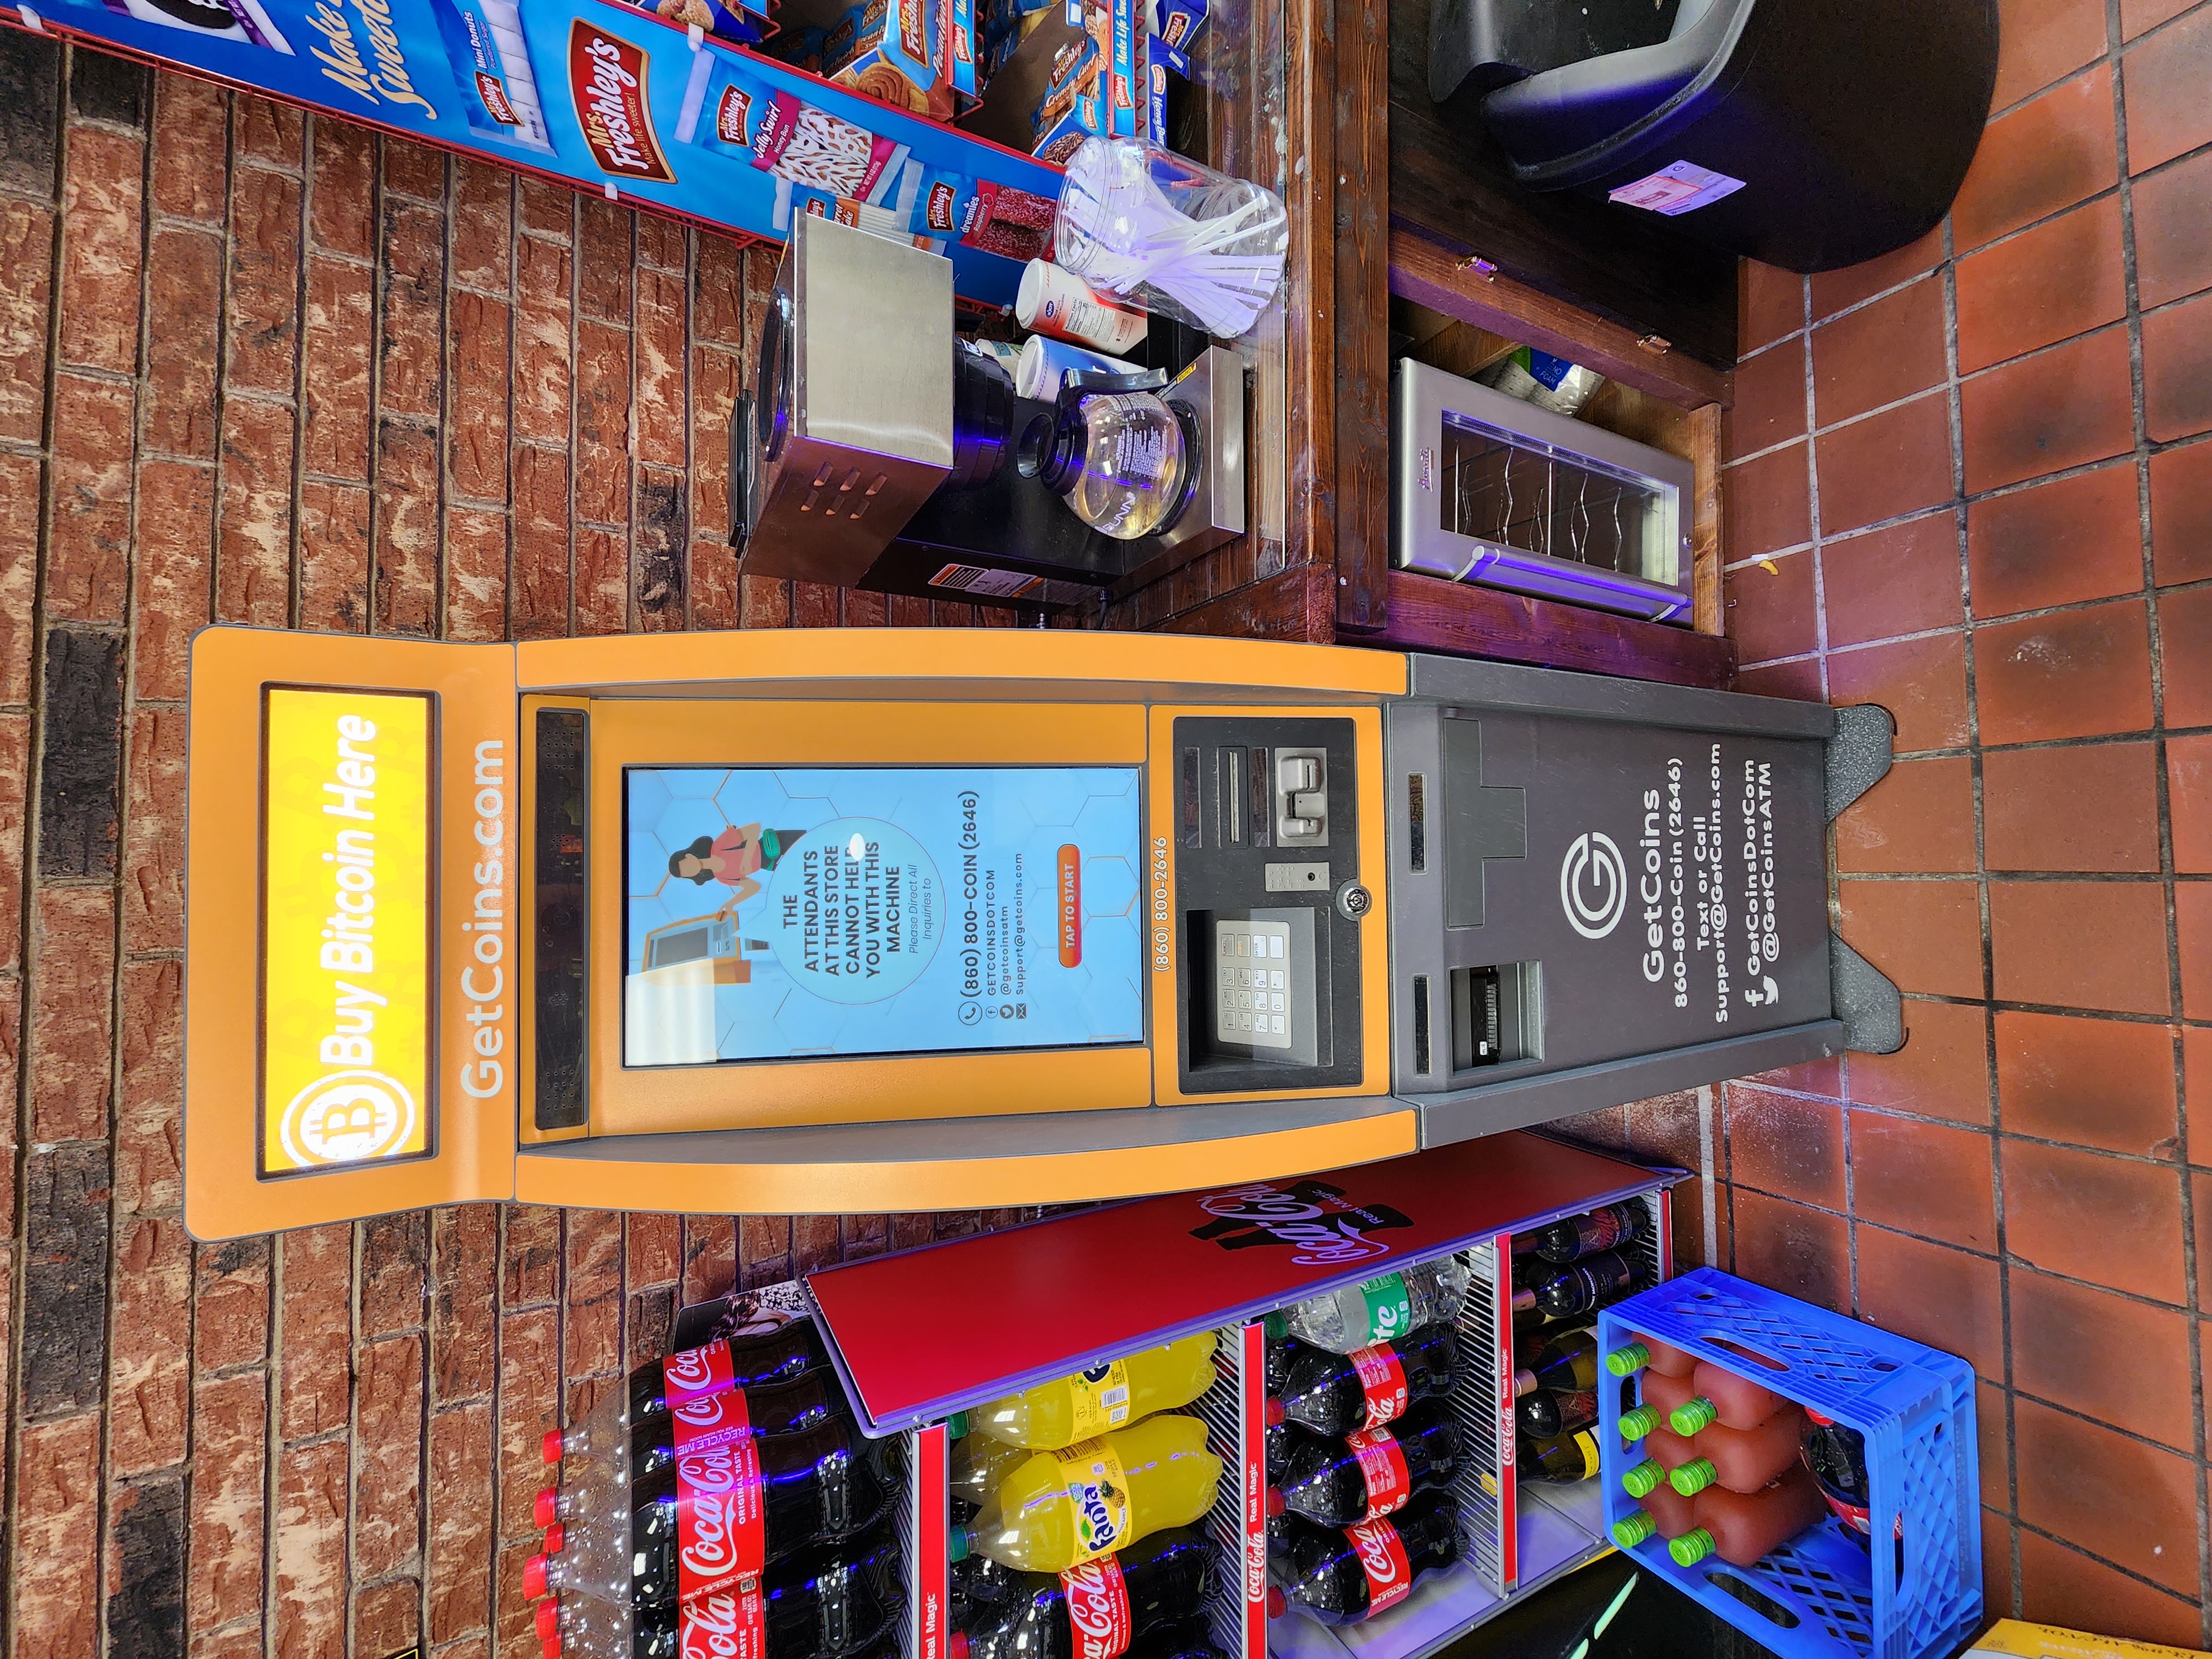 Getcoins - Bitcoin ATM - Inside of Wagon Beer & Wine in Garland, Texas